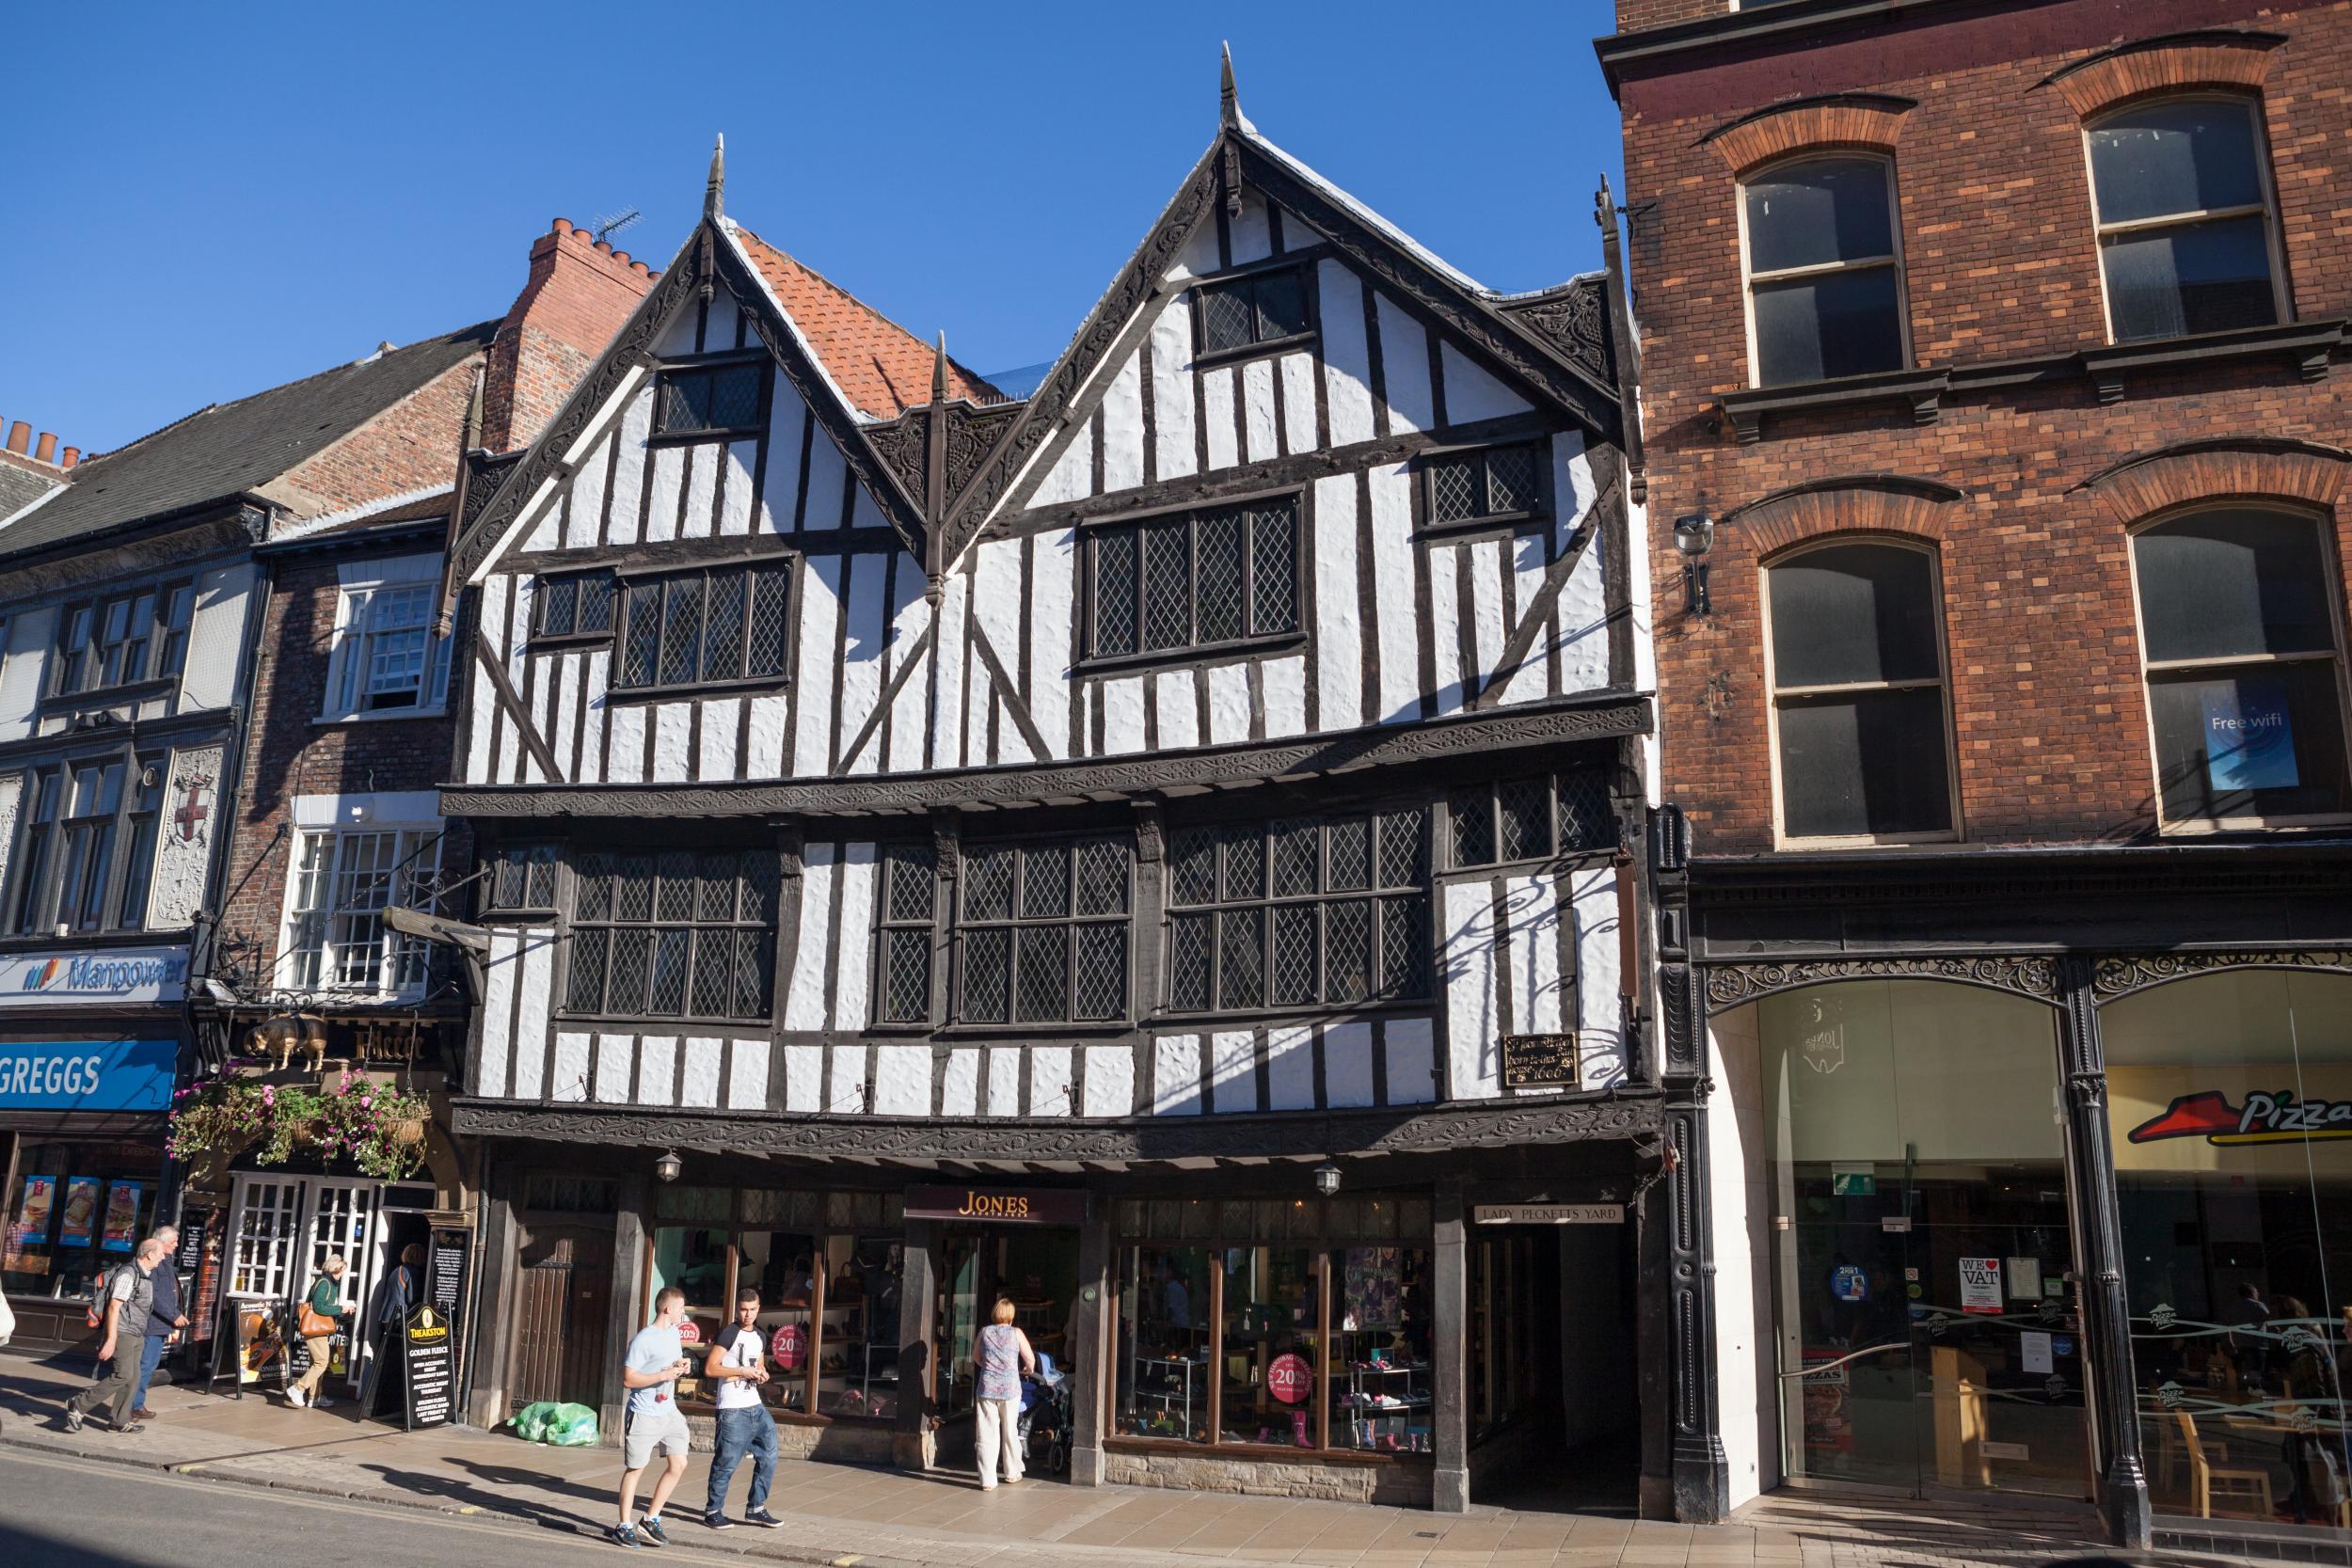 York's streets are filled with wonky medieval houses